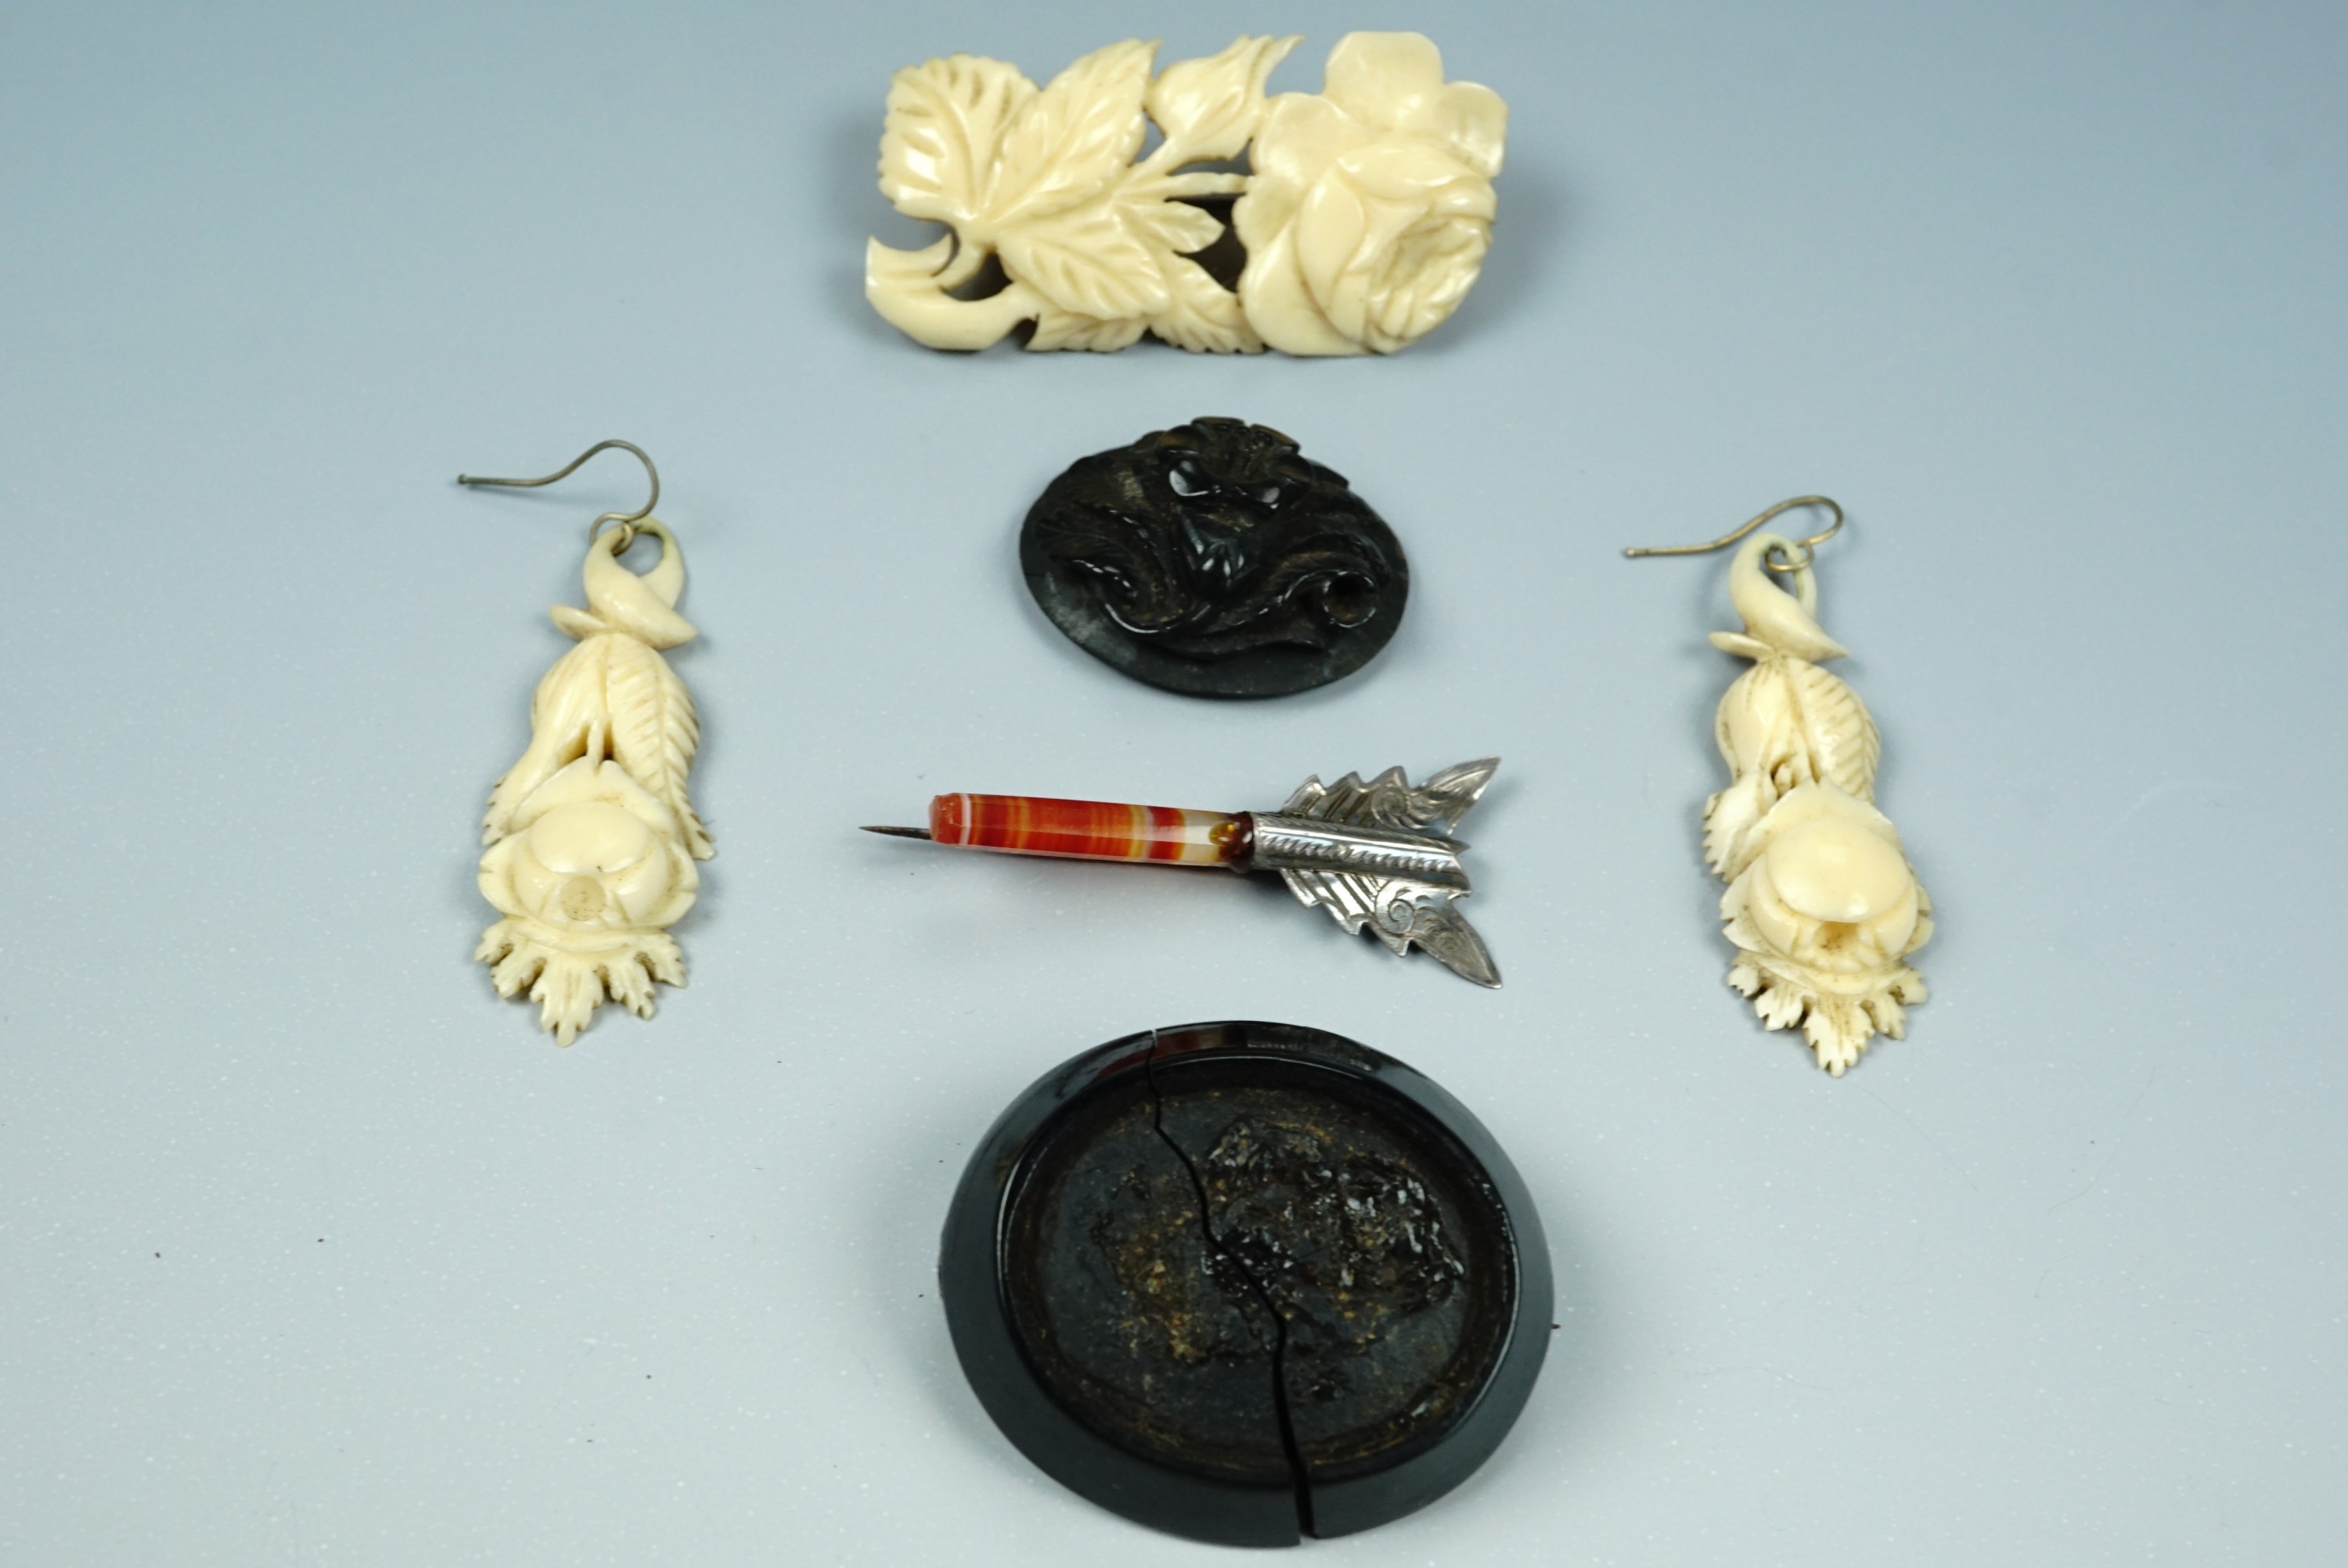 Victorian jewellery, including a jet brooch, ivory ear pendants and a brooch, together with a